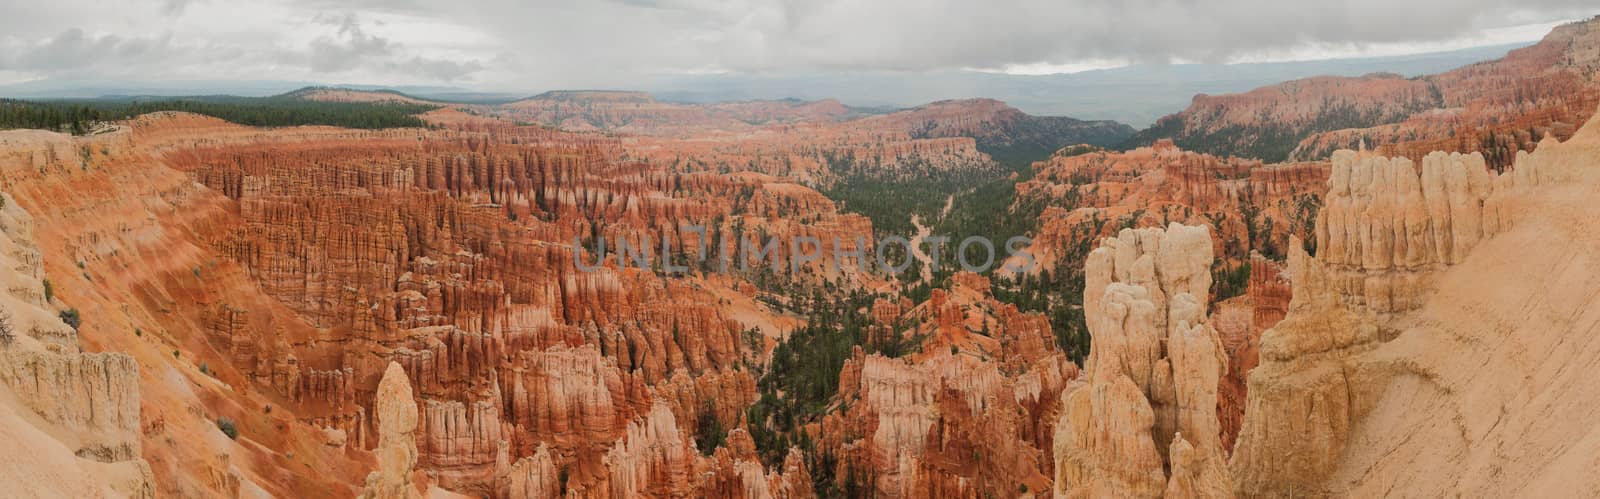 Bryce Canyon amphitheater panorama by weltreisendertj